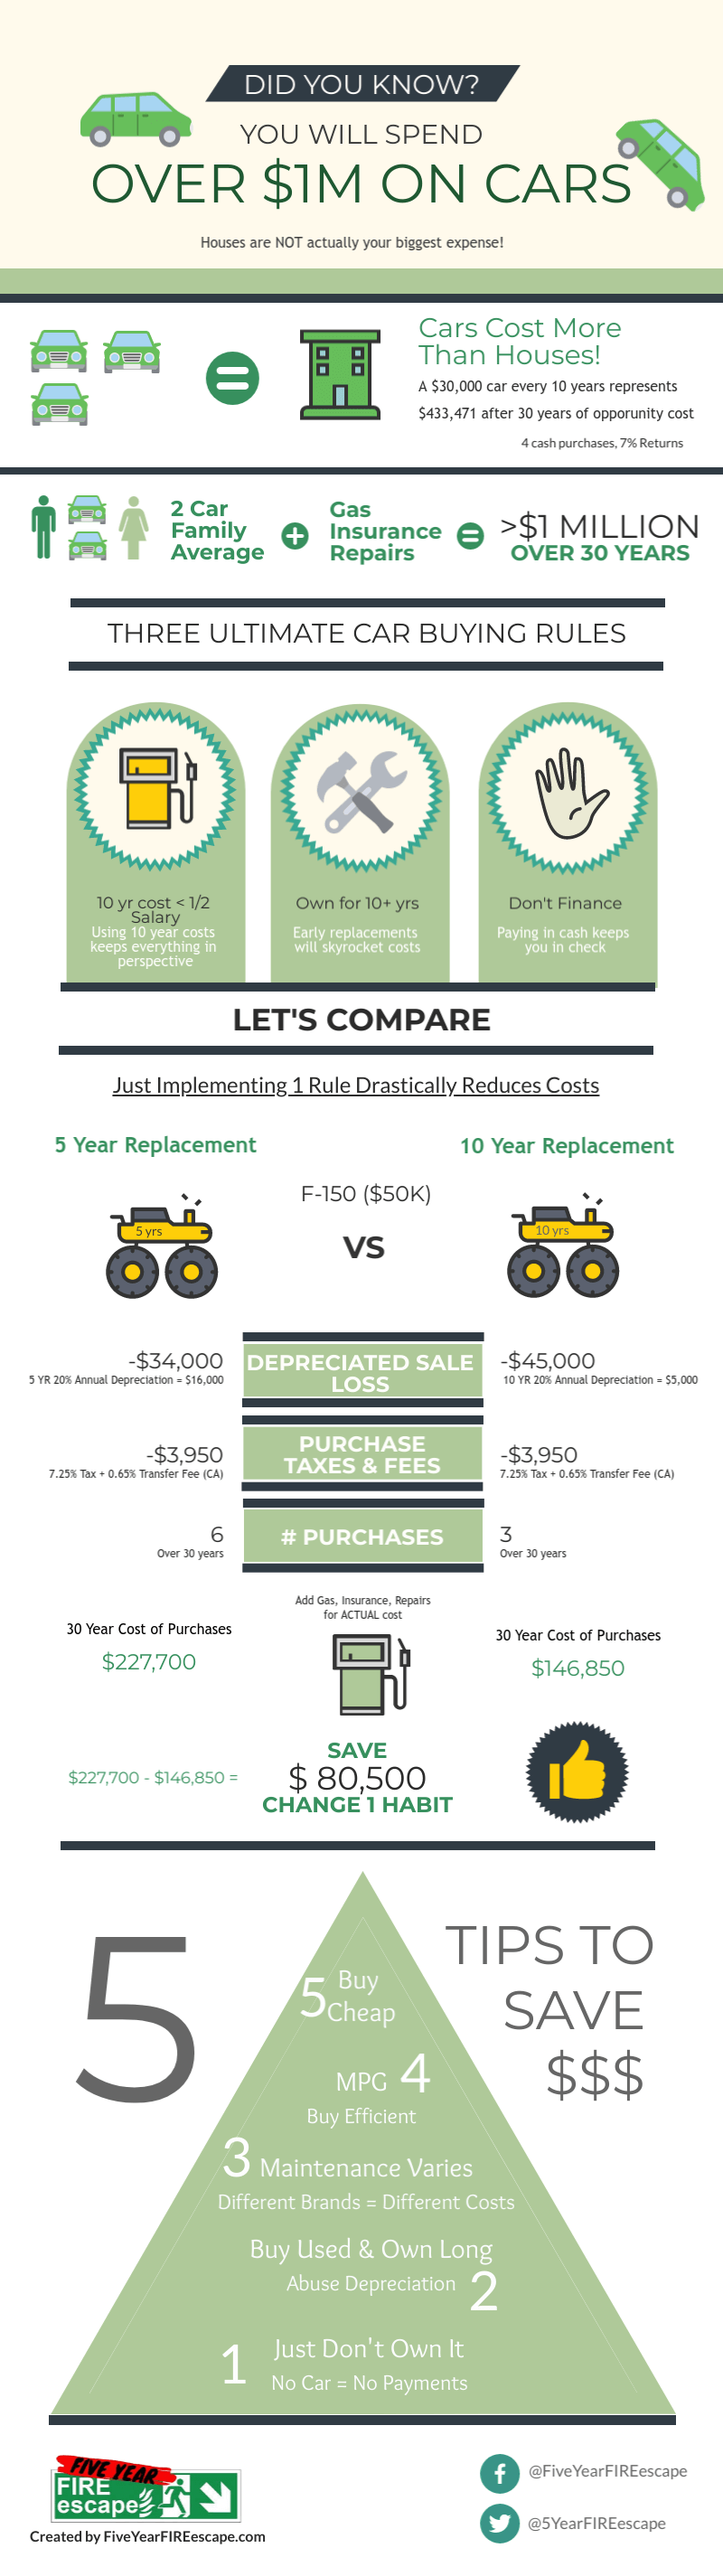 How-much-car-can-I-afford-infographic